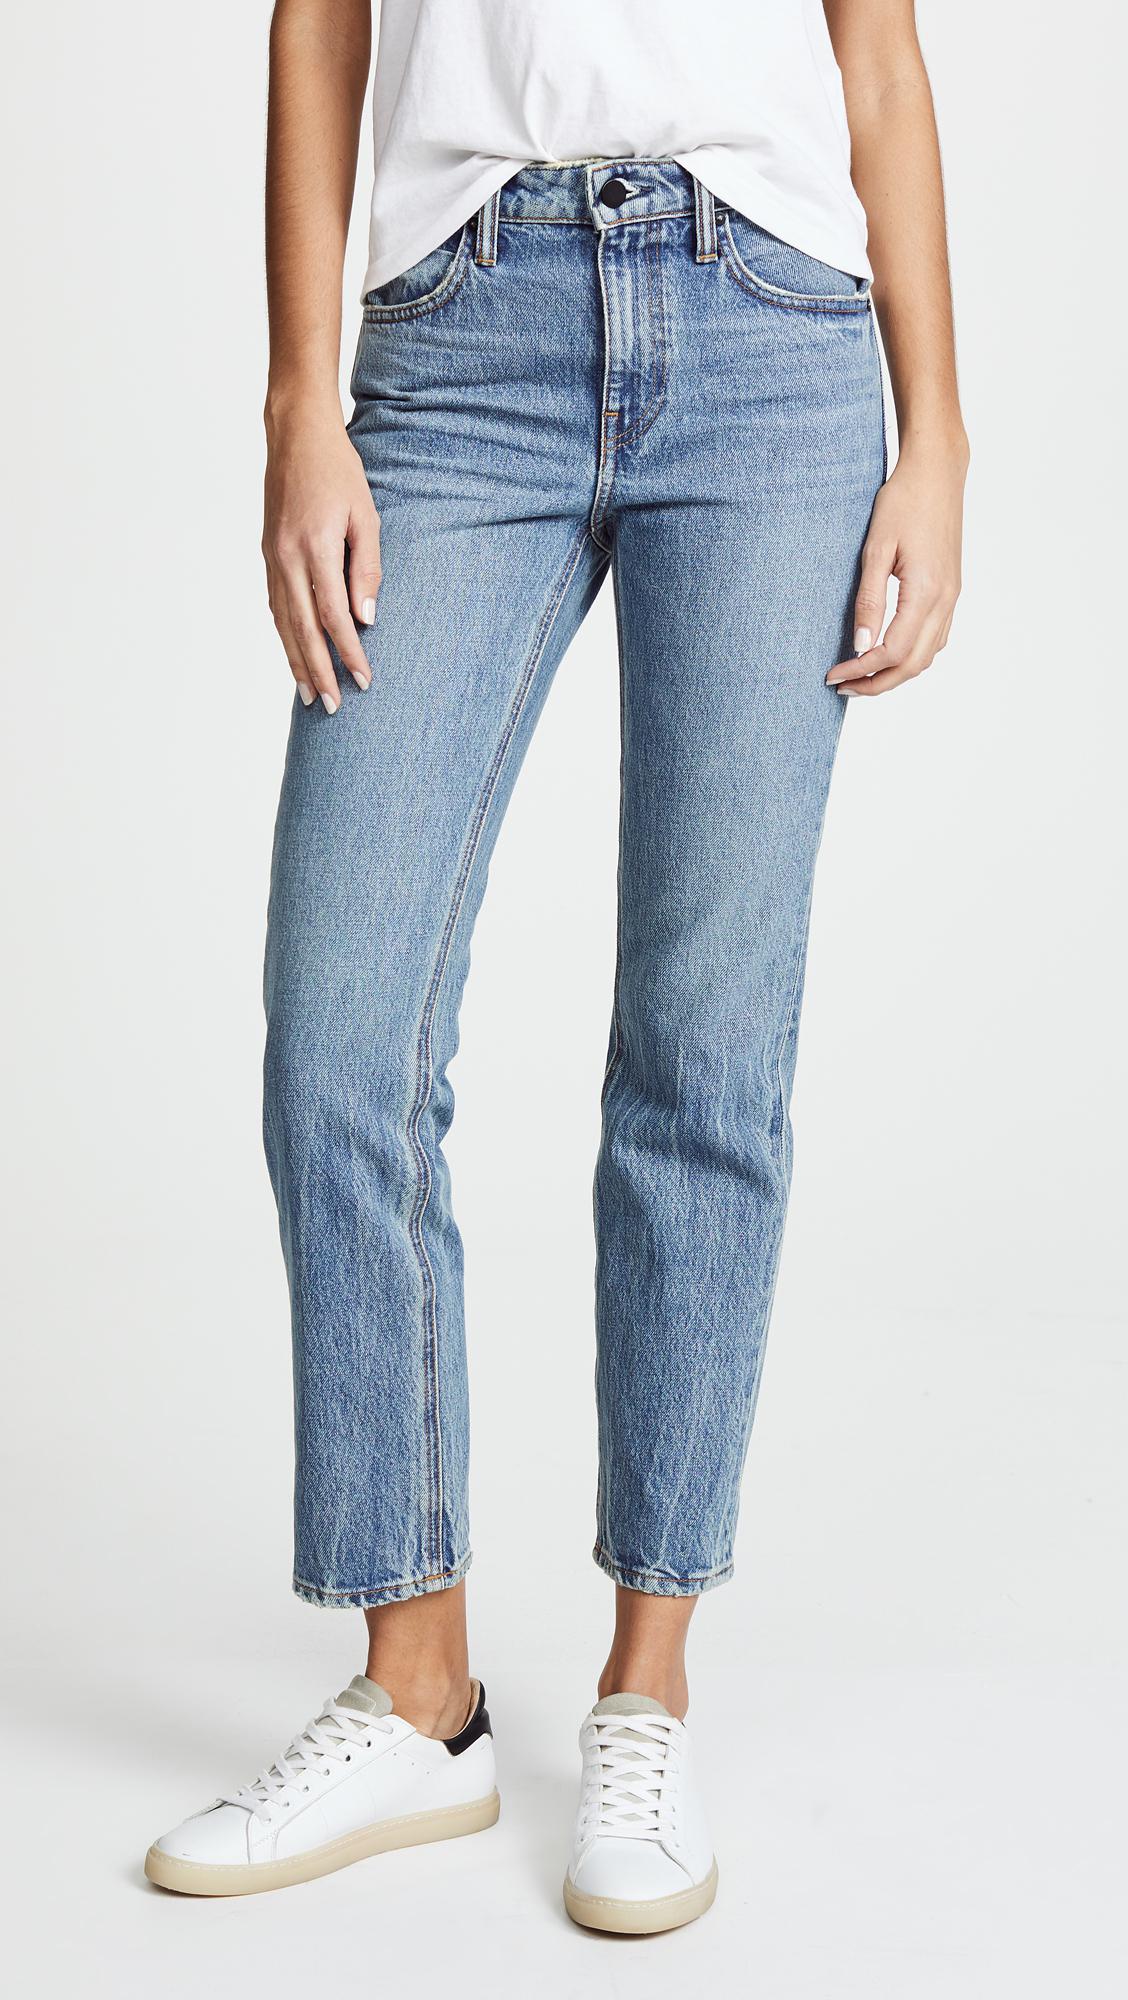 Lyst - Alexander Wang Cult Cropped Straight Leg Jeans in Blue